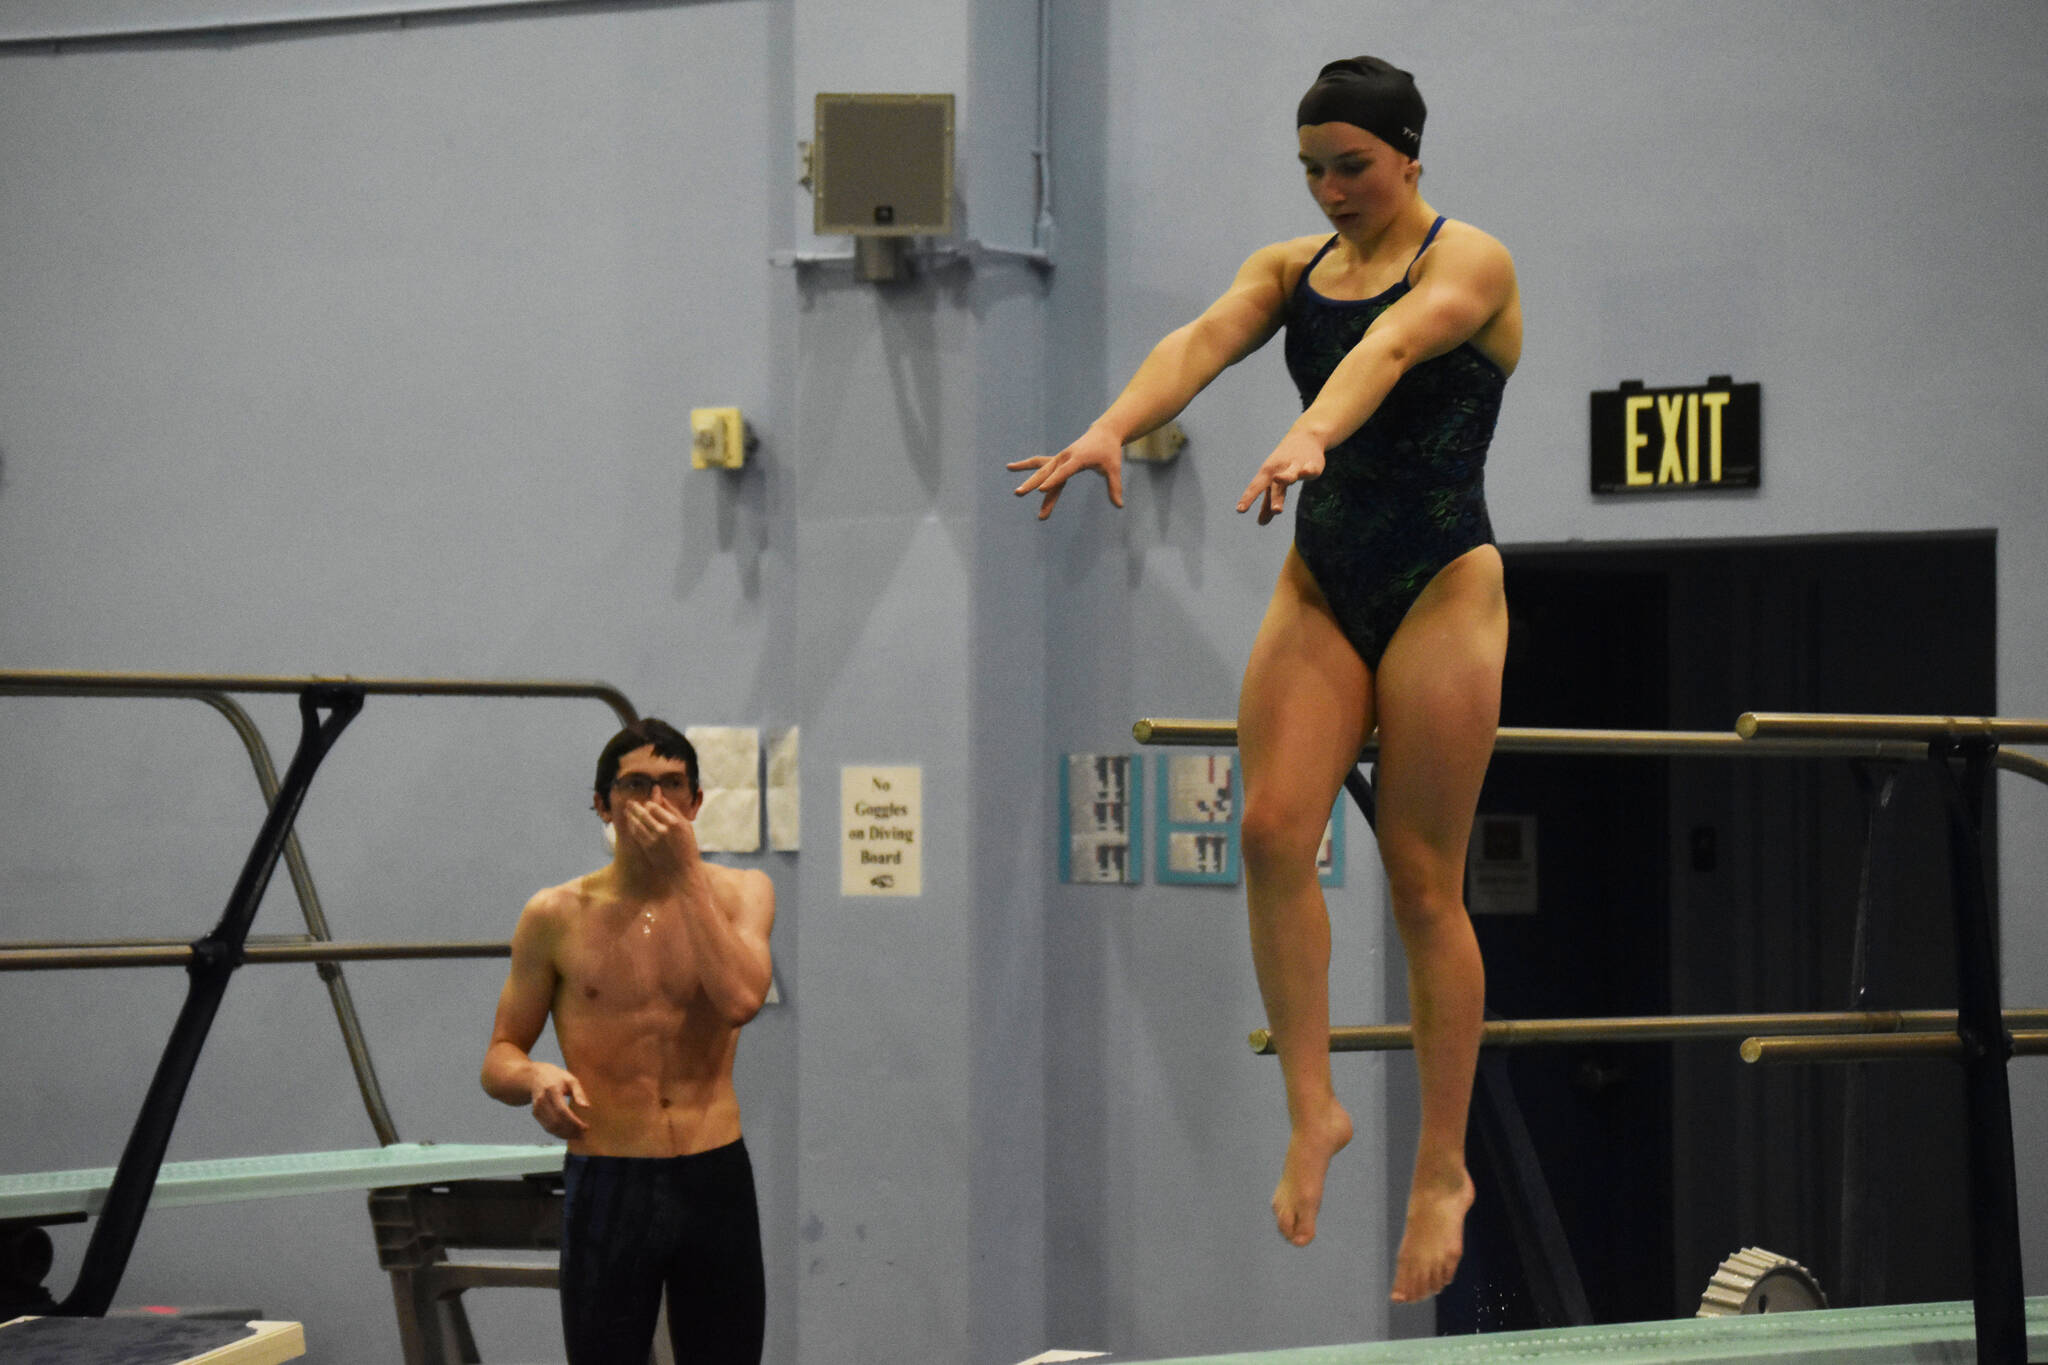 Abriella Werner leaps as she approaches the end of the diving board, Derrick Jones watches during a dive practice on Tuesday, Oct. 11, 2022, at Soldotna High School in Soldotna, Alaska. (Jake Dye/Peninsula Clarion)